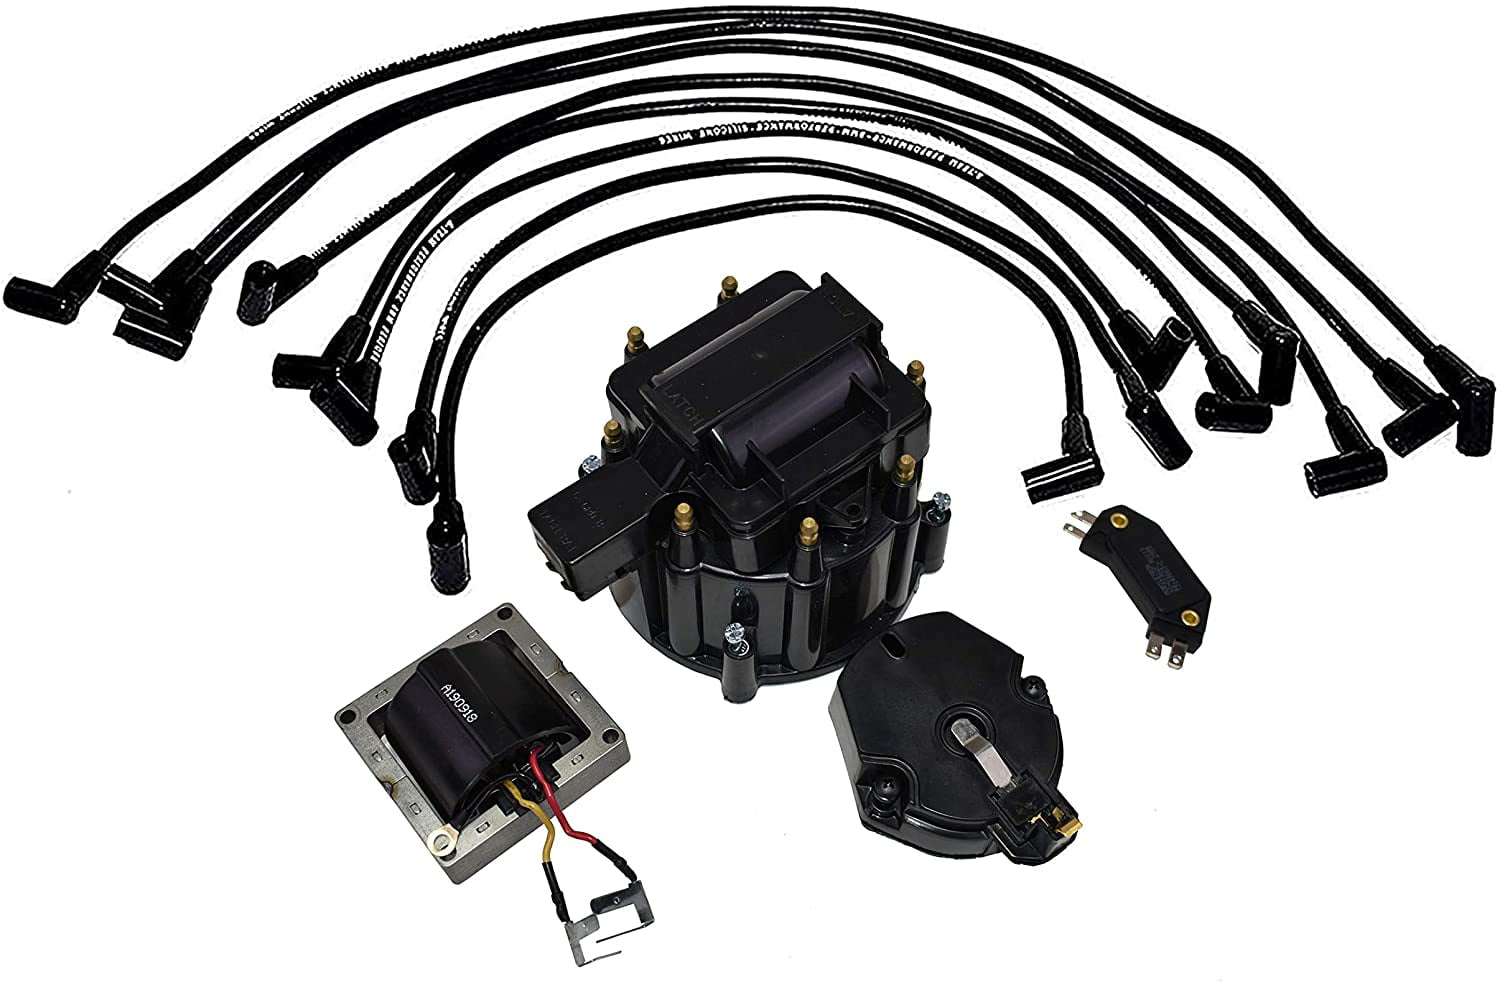 65k Volt Coil HEI Distributor Tune Up Kit & 8.0mm Over the Valve Cover Spark Plug Wires Compatible with Chevrolet SBC 262 283 302 305 307 327 350 400 Black A-Team Performance 8-Cylinder Male Cap 